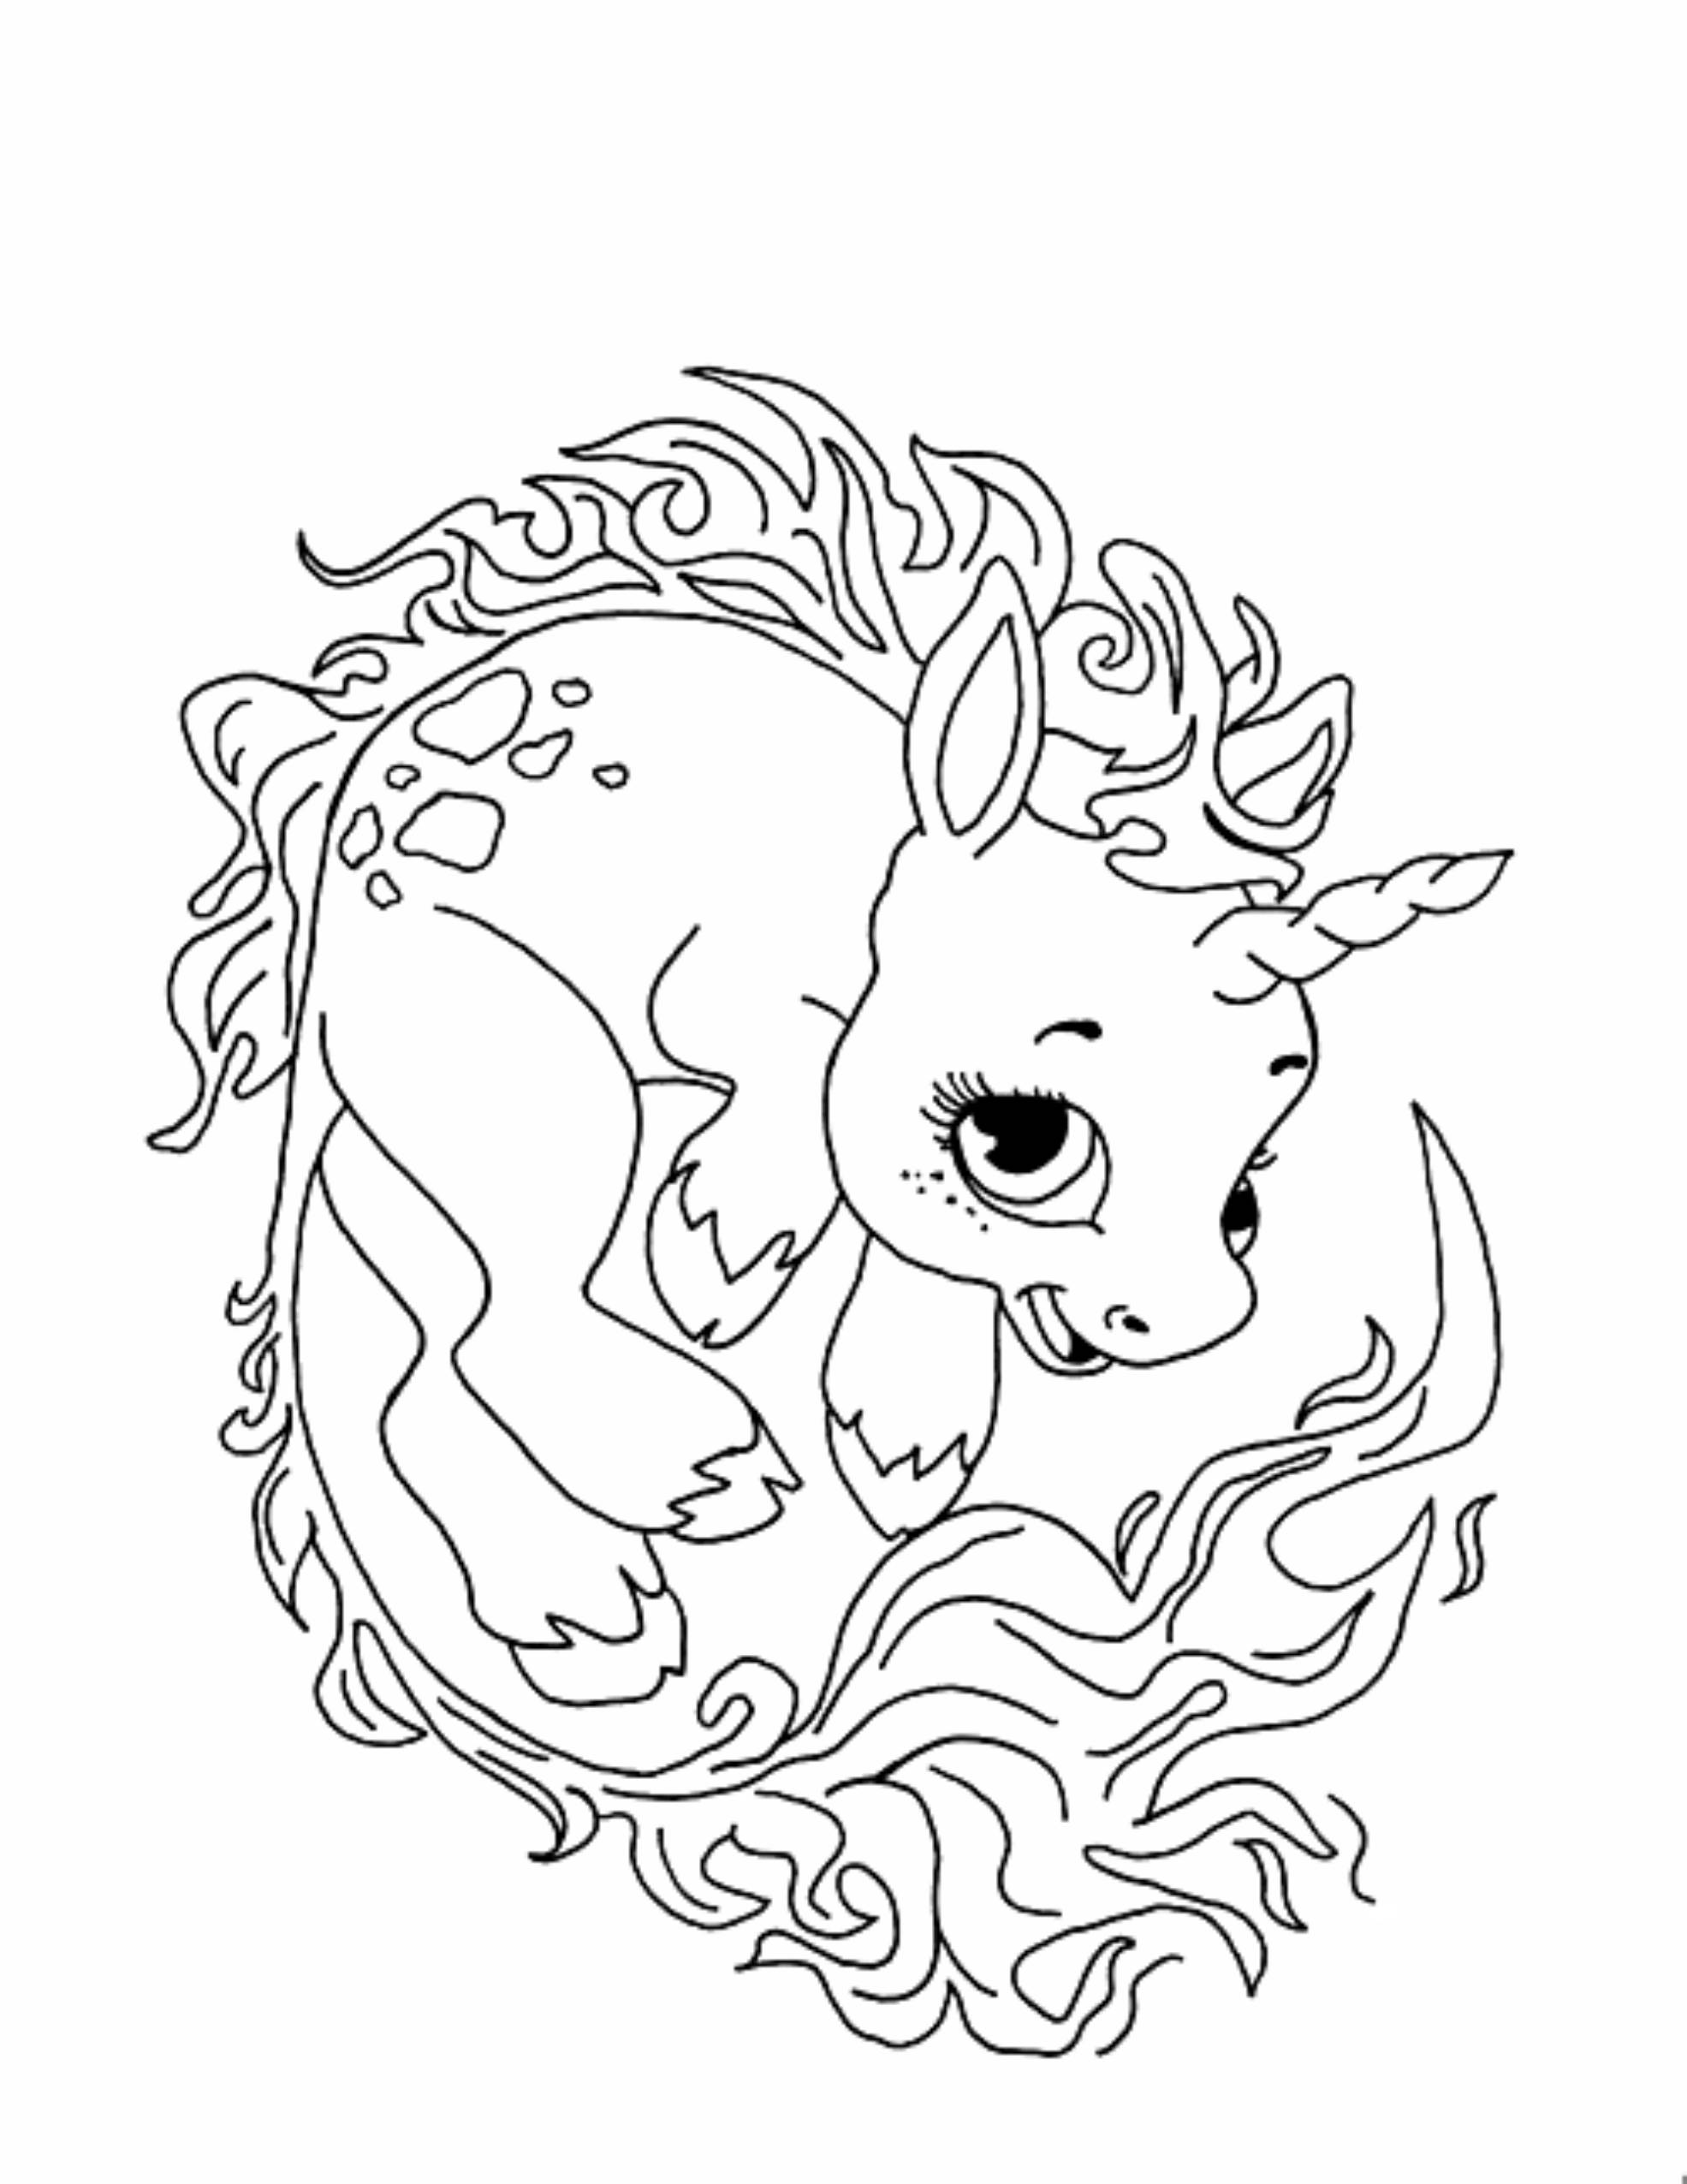 Cute unicorn coloring pages BestAppsForKids